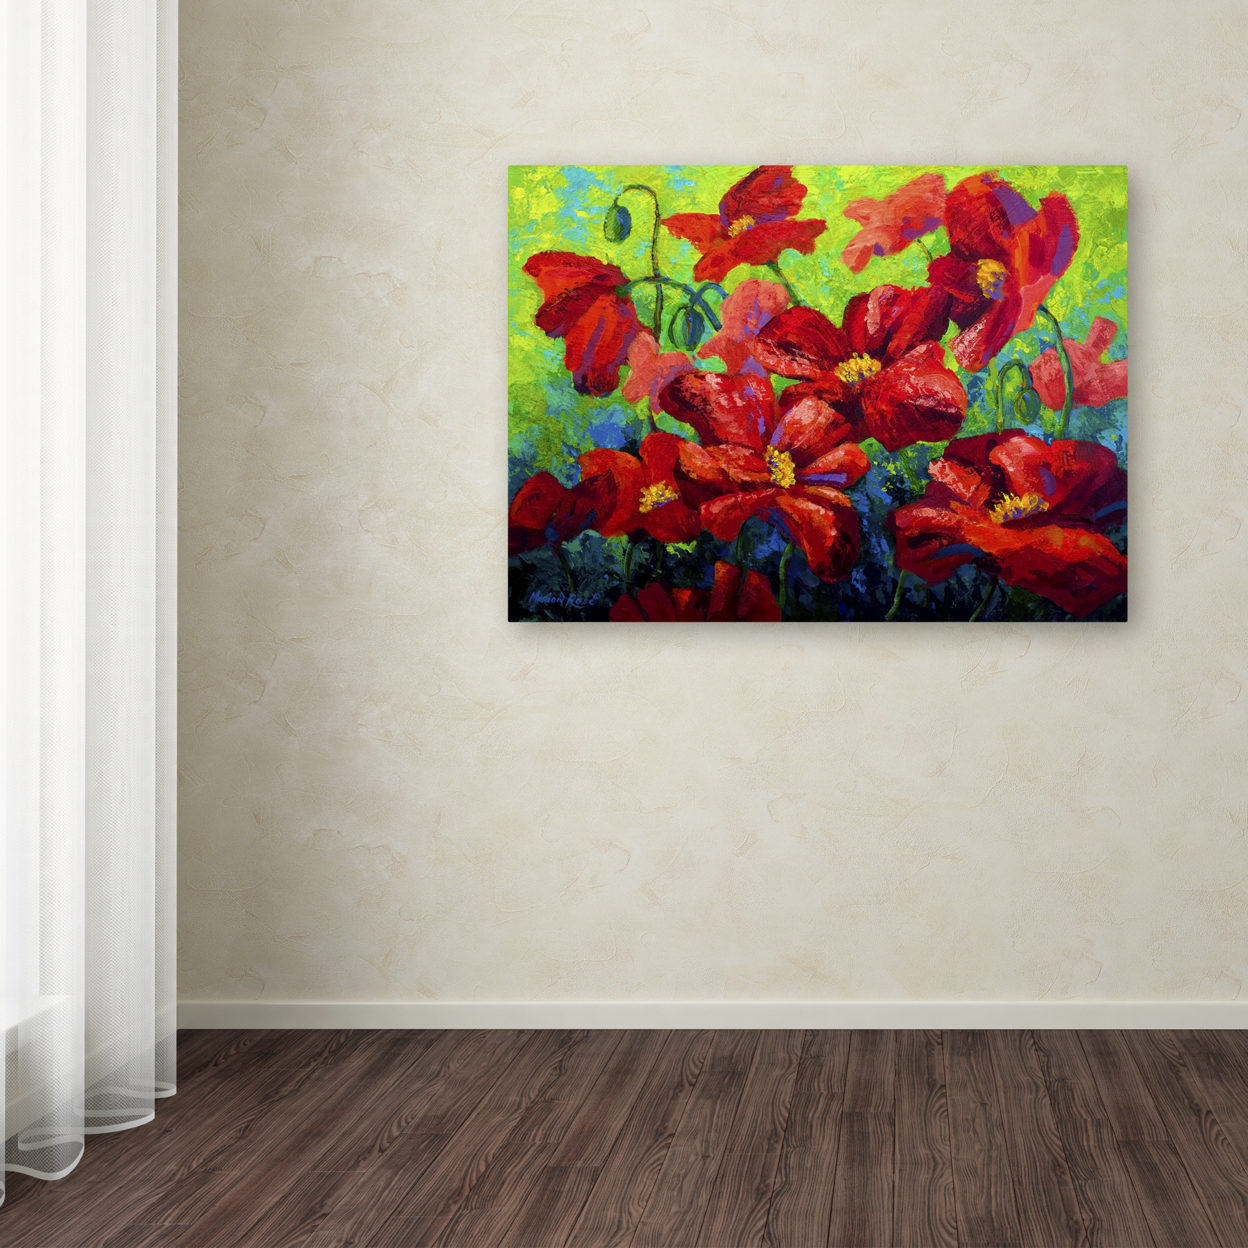 Marion Rose 'Field Of Poppies A' Ready To Hang Canvas Art 24 X 32 Inches Made In USA